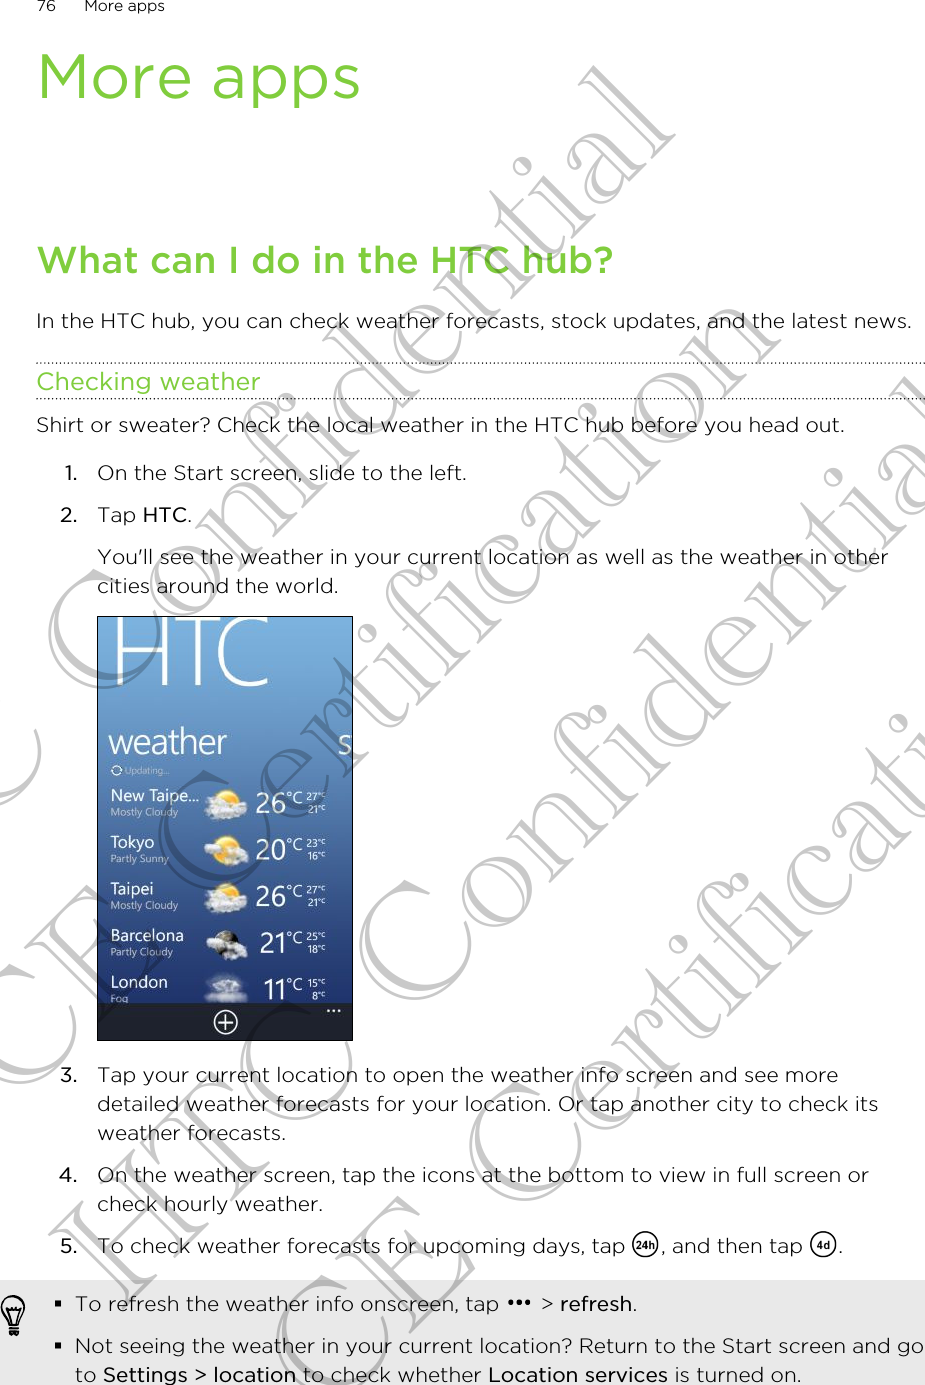 More appsWhat can I do in the HTC hub?In the HTC hub, you can check weather forecasts, stock updates, and the latest news.Checking weatherShirt or sweater? Check the local weather in the HTC hub before you head out.1. On the Start screen, slide to the left.2. Tap HTC. You&apos;ll see the weather in your current location as well as the weather in othercities around the world.3. Tap your current location to open the weather info screen and see moredetailed weather forecasts for your location. Or tap another city to check itsweather forecasts.4. On the weather screen, tap the icons at the bottom to view in full screen orcheck hourly weather.5. To check weather forecasts for upcoming days, tap  , and then tap  .§To refresh the weather info onscreen, tap   &gt; refresh.§Not seeing the weather in your current location? Return to the Start screen and goto Settings &gt; location to check whether Location services is turned on.76 More appsHTC Confidential CE Certification HTC Confidential CE Certification